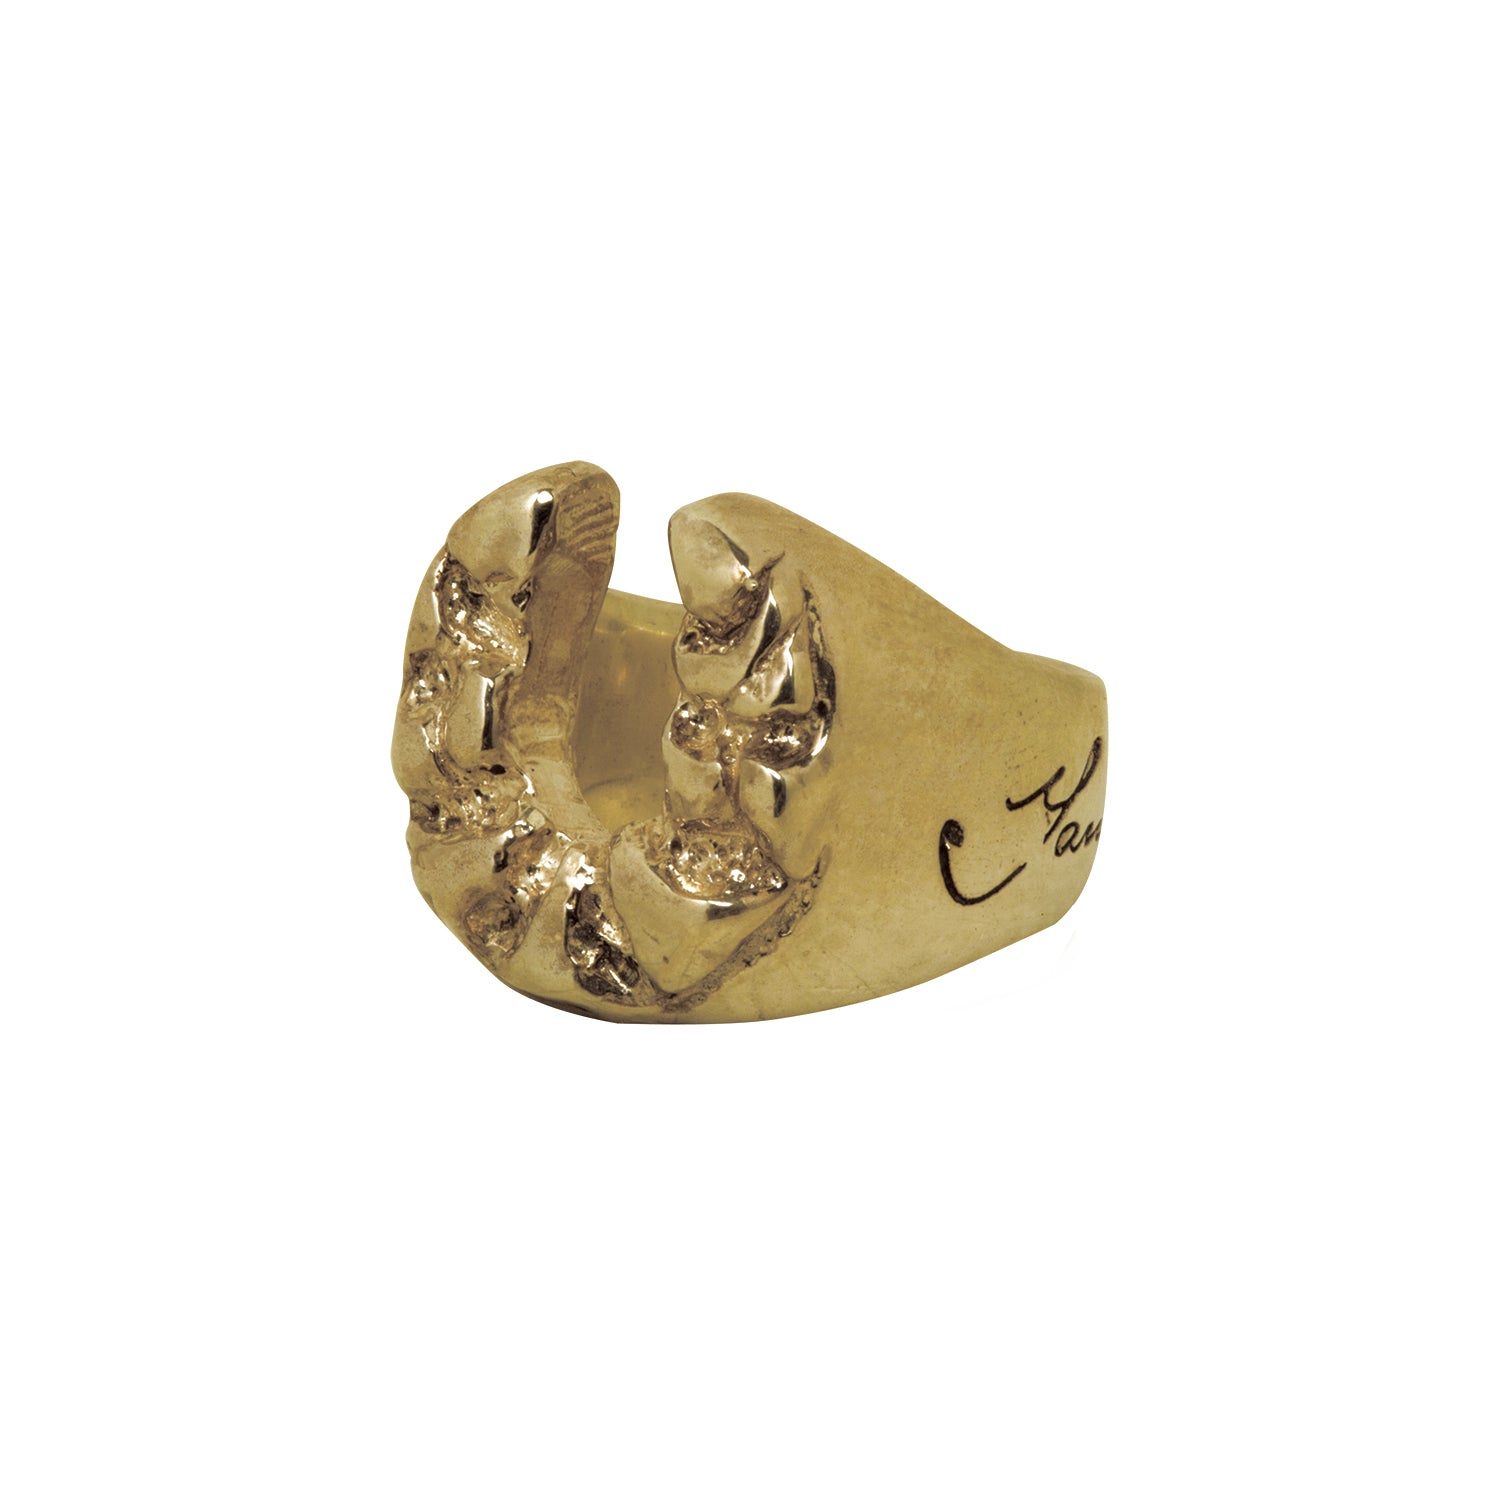 G&F Co. - HORSE SHOE RING _ SILVER 925 & 18 GOLD COATING